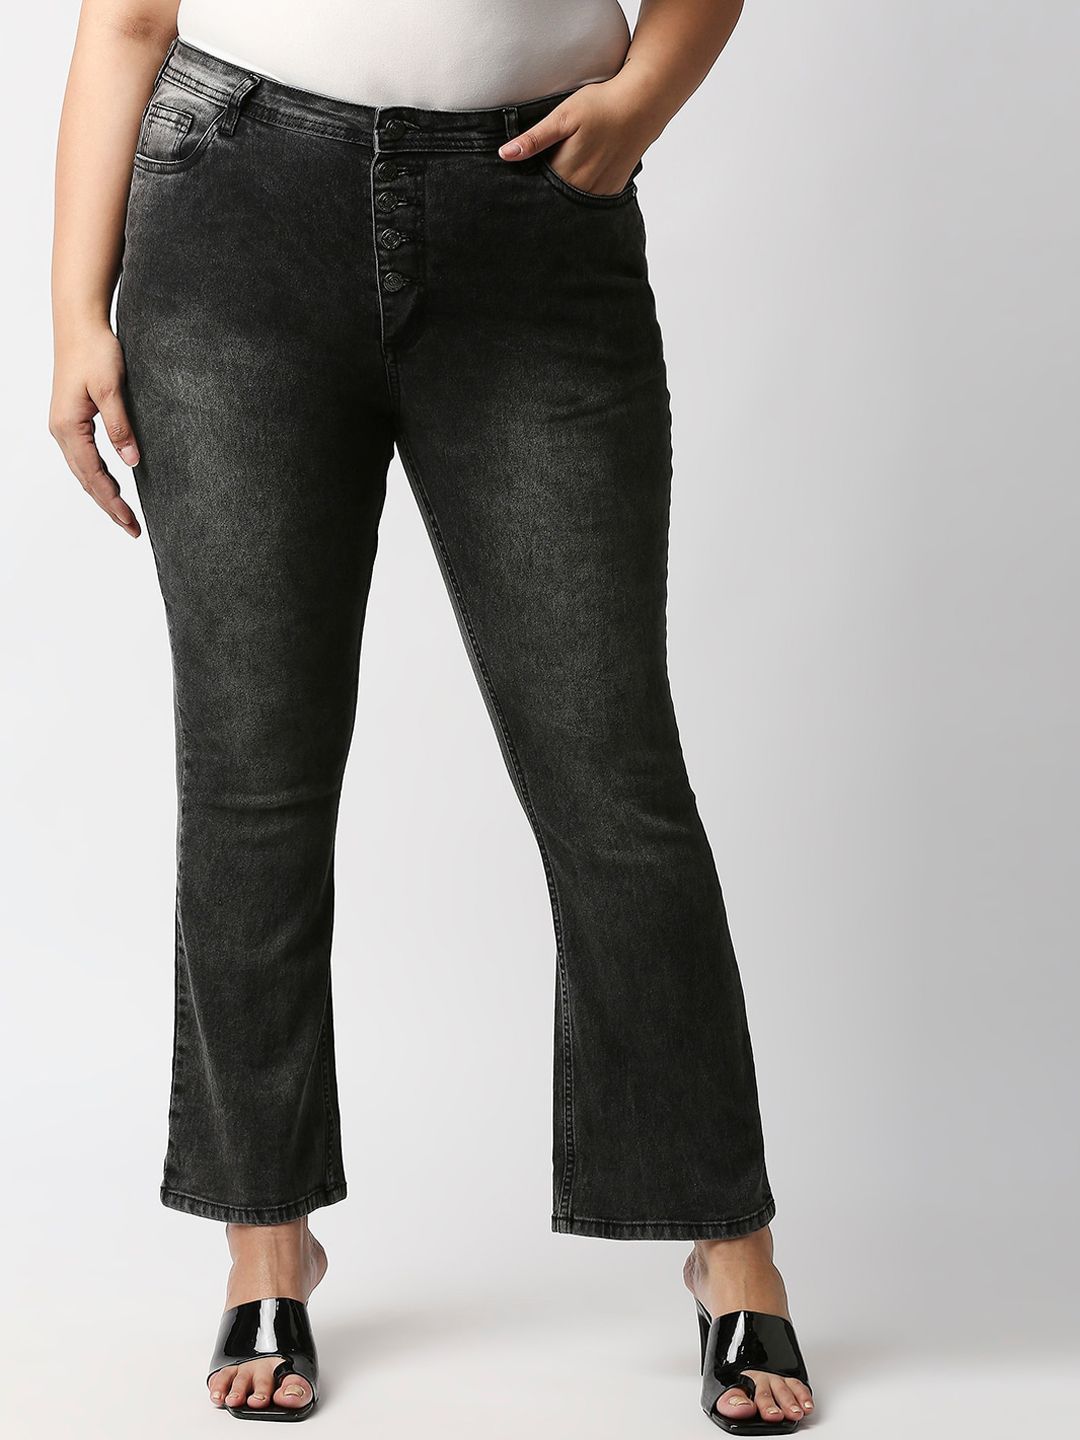 High Star Women Plus Size Black Bootcut Light Fade Stretchable Jeans Price in India